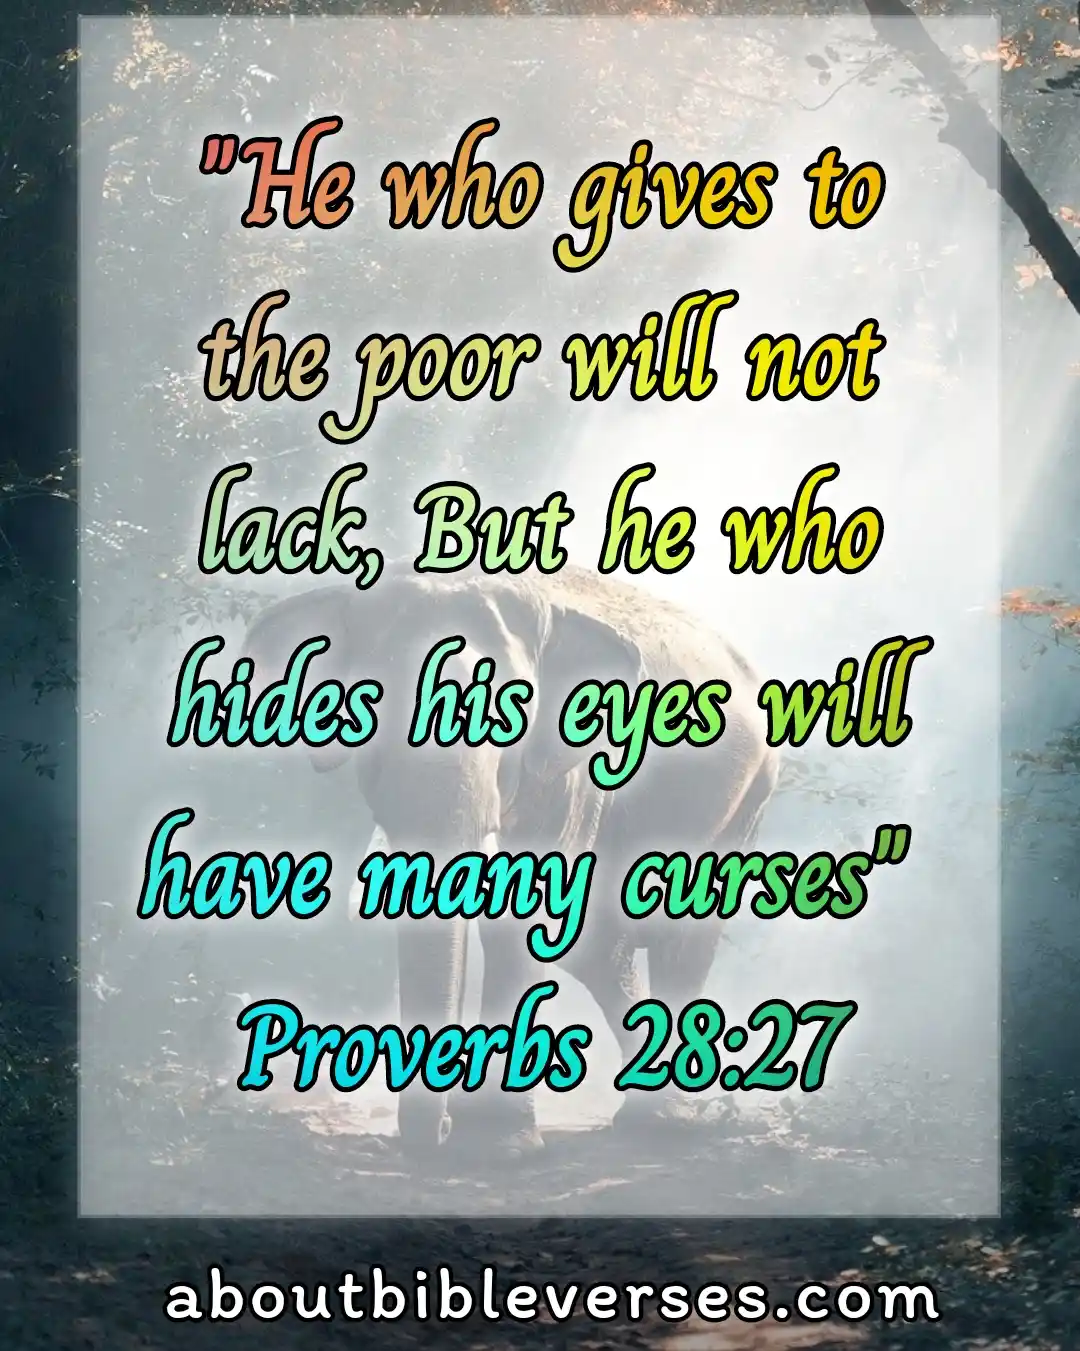 Bible Verses About Serving Others (Proverbs 28:27)